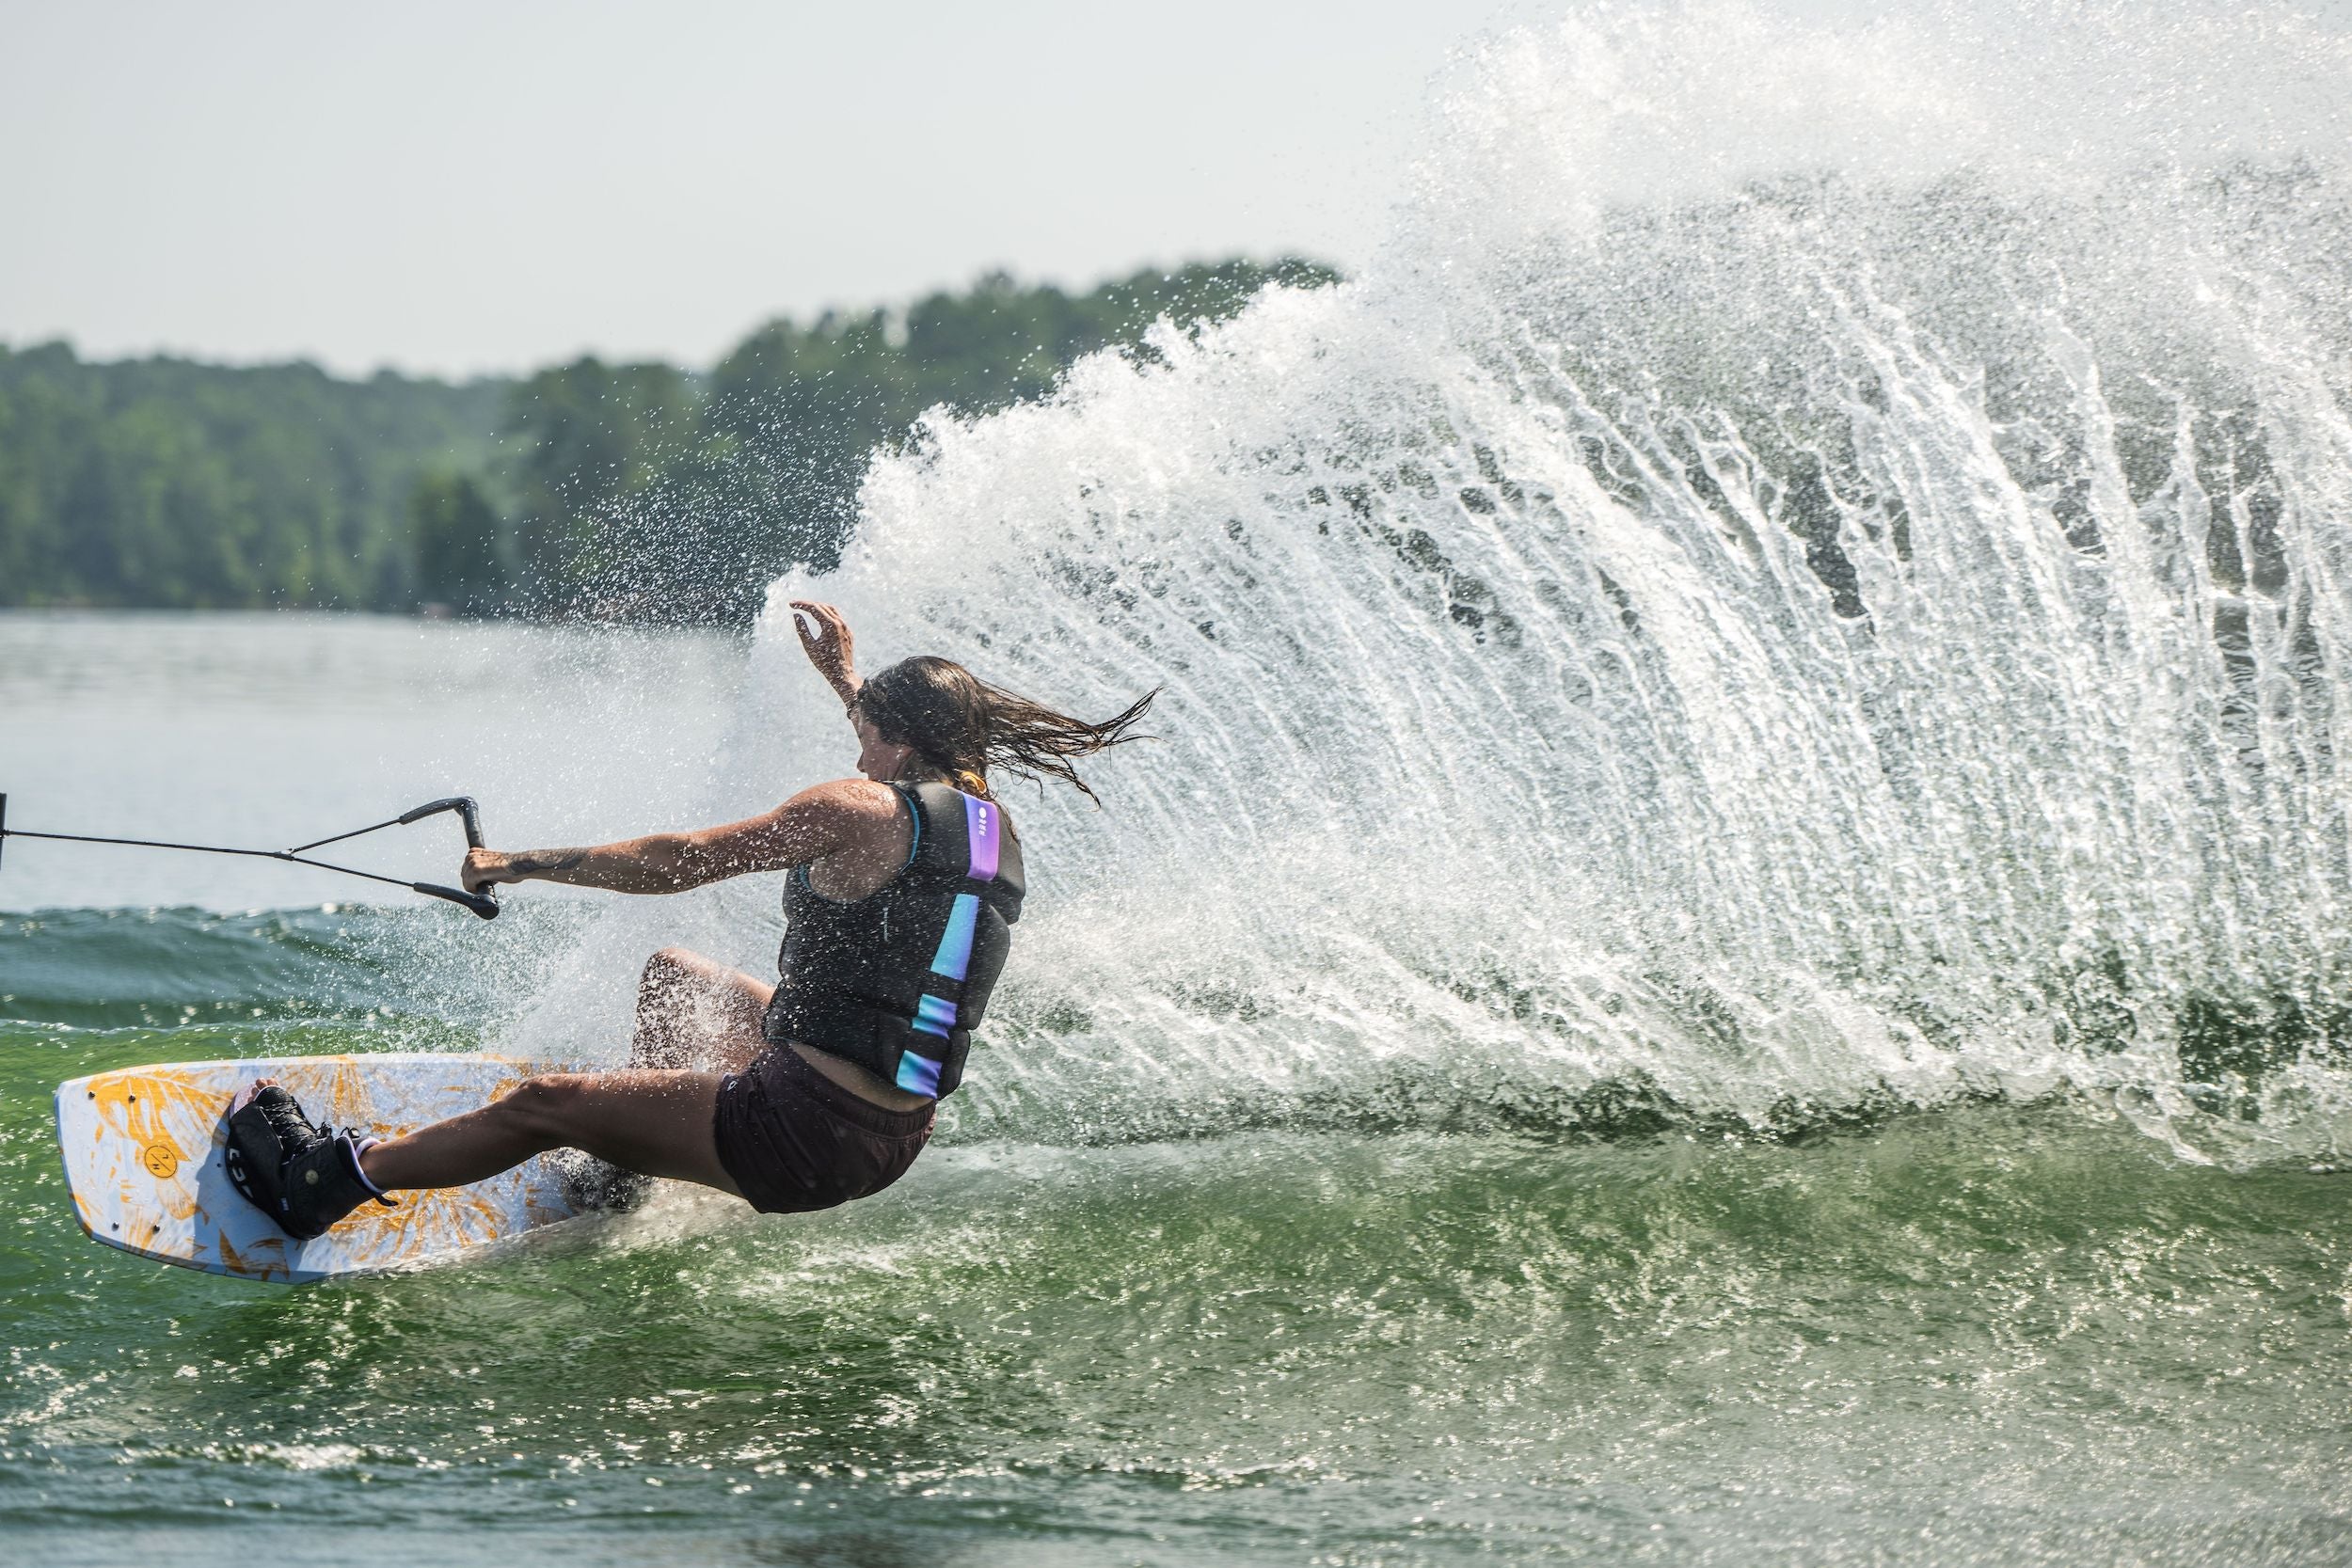 A Hyperlite 2023 Prizm Wakeboard inspired woman glides across the lake on her ladies wakeboard.